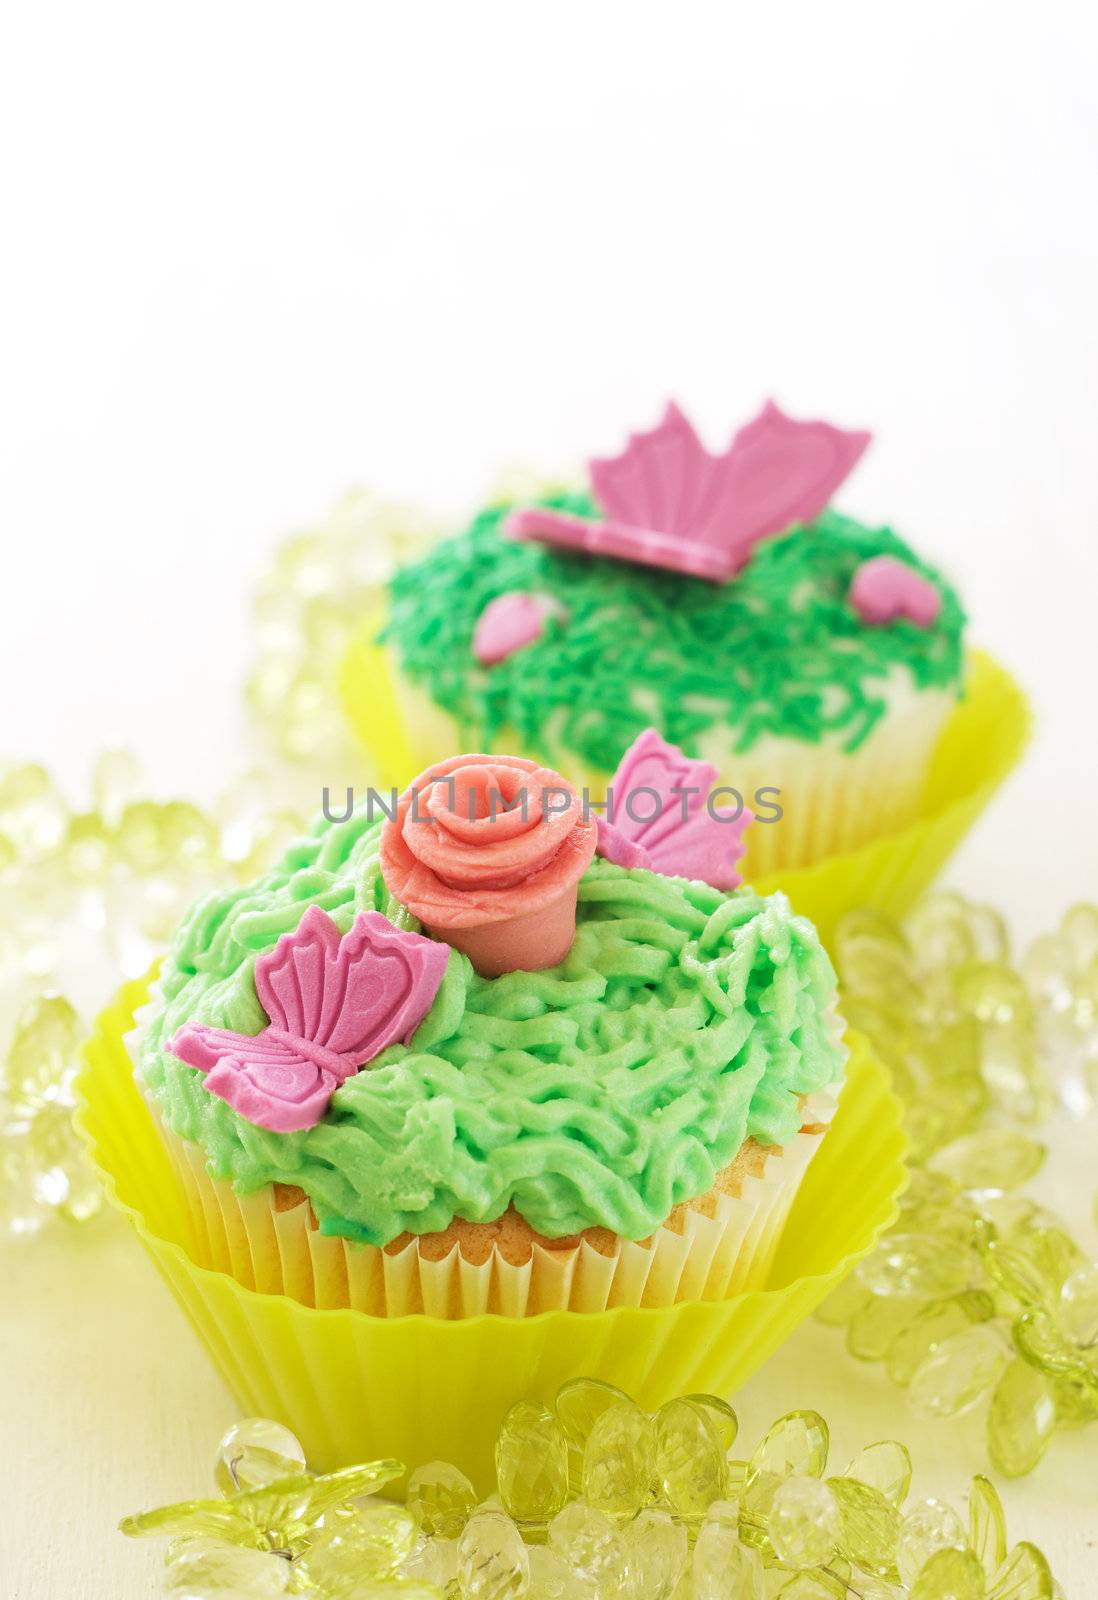 Vanilla cupcakes with various decorations by Elenat